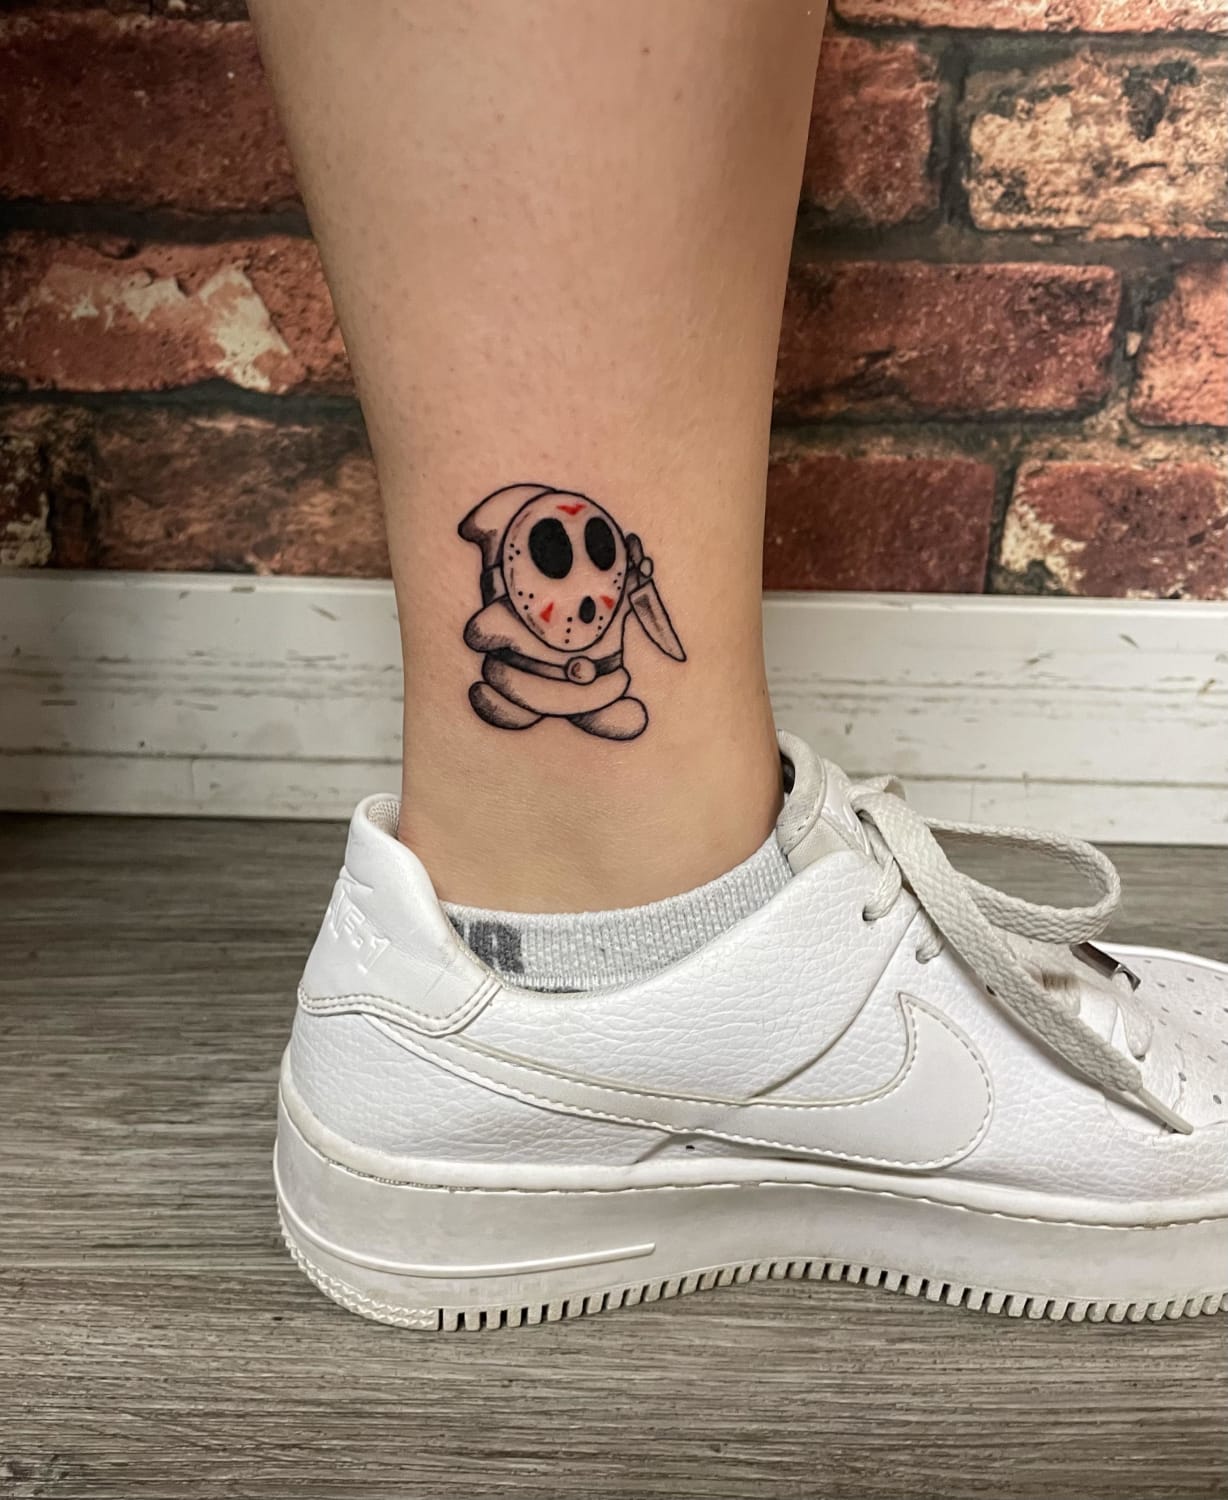 got this little halloween flash shy guy by andy from sorry mum tattoos in ottawa